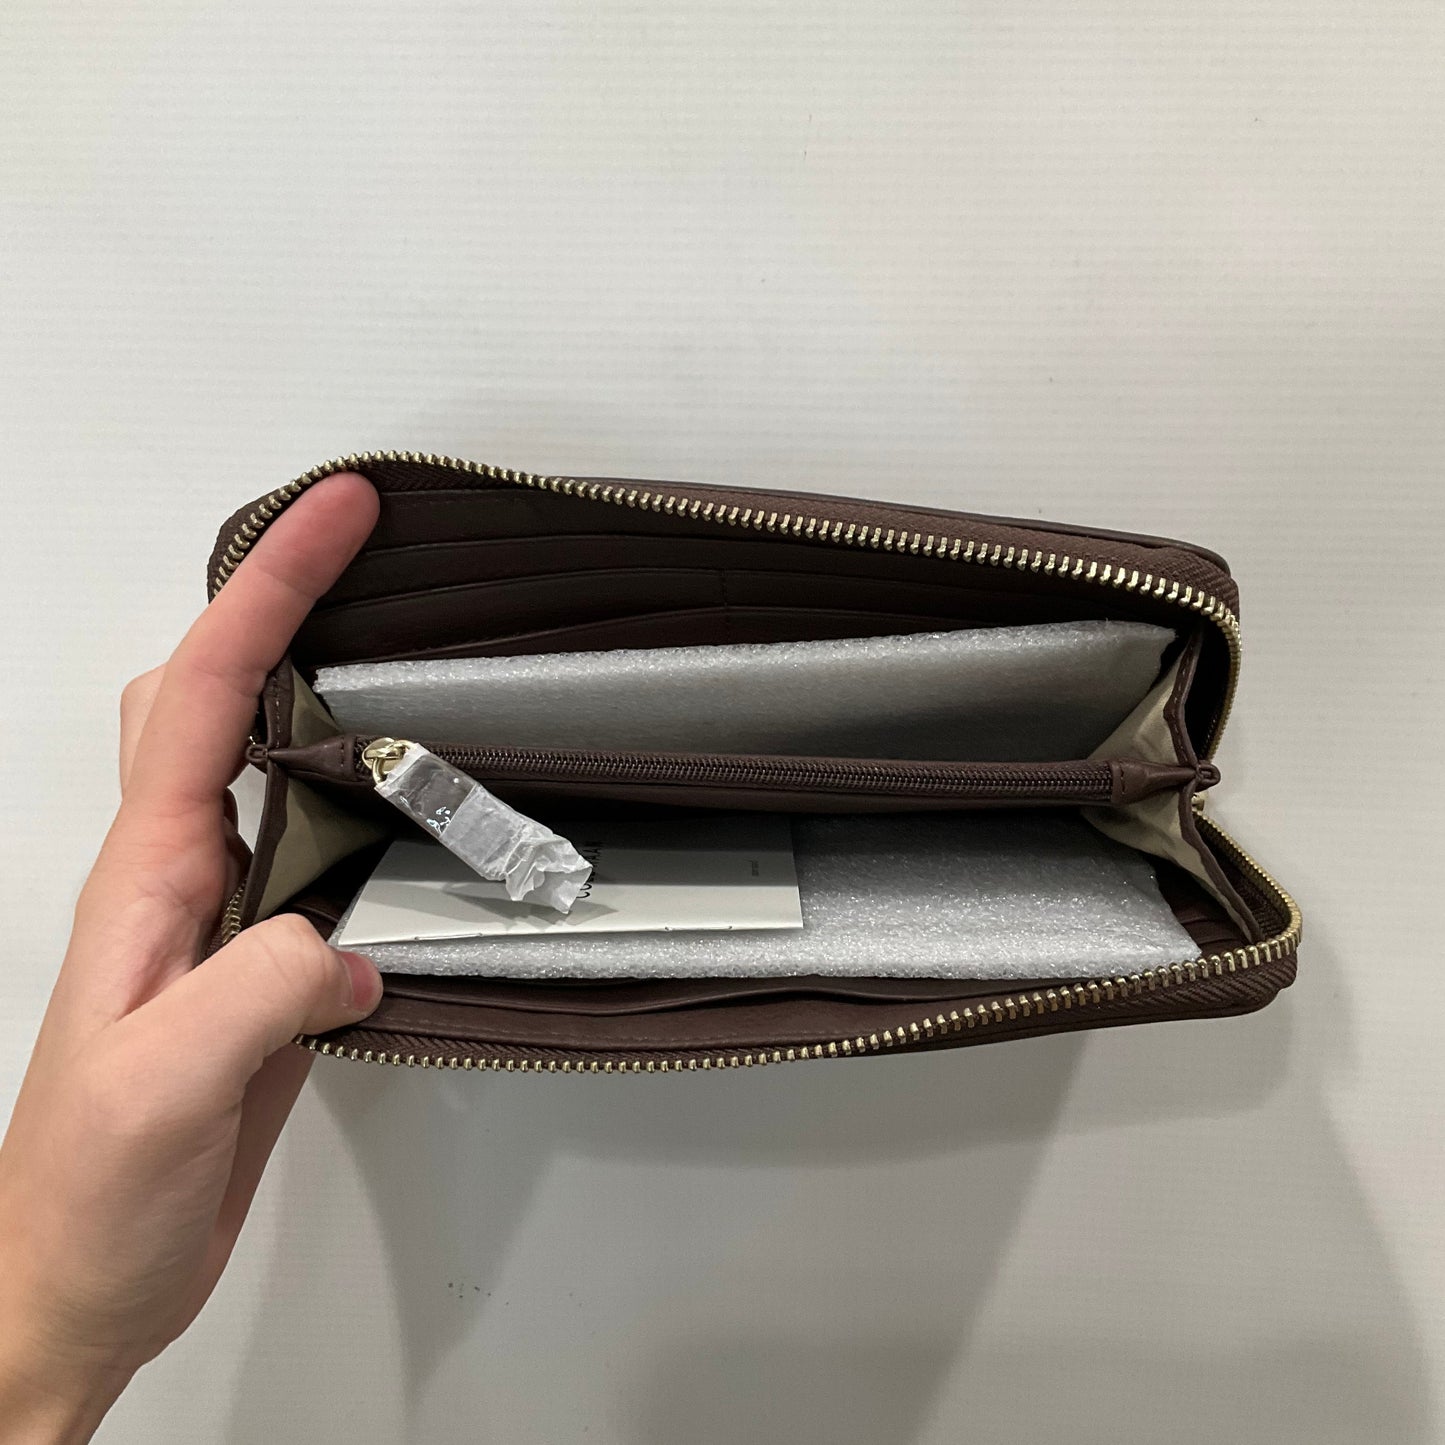 Wallet Leather Cole-haan, Size Medium